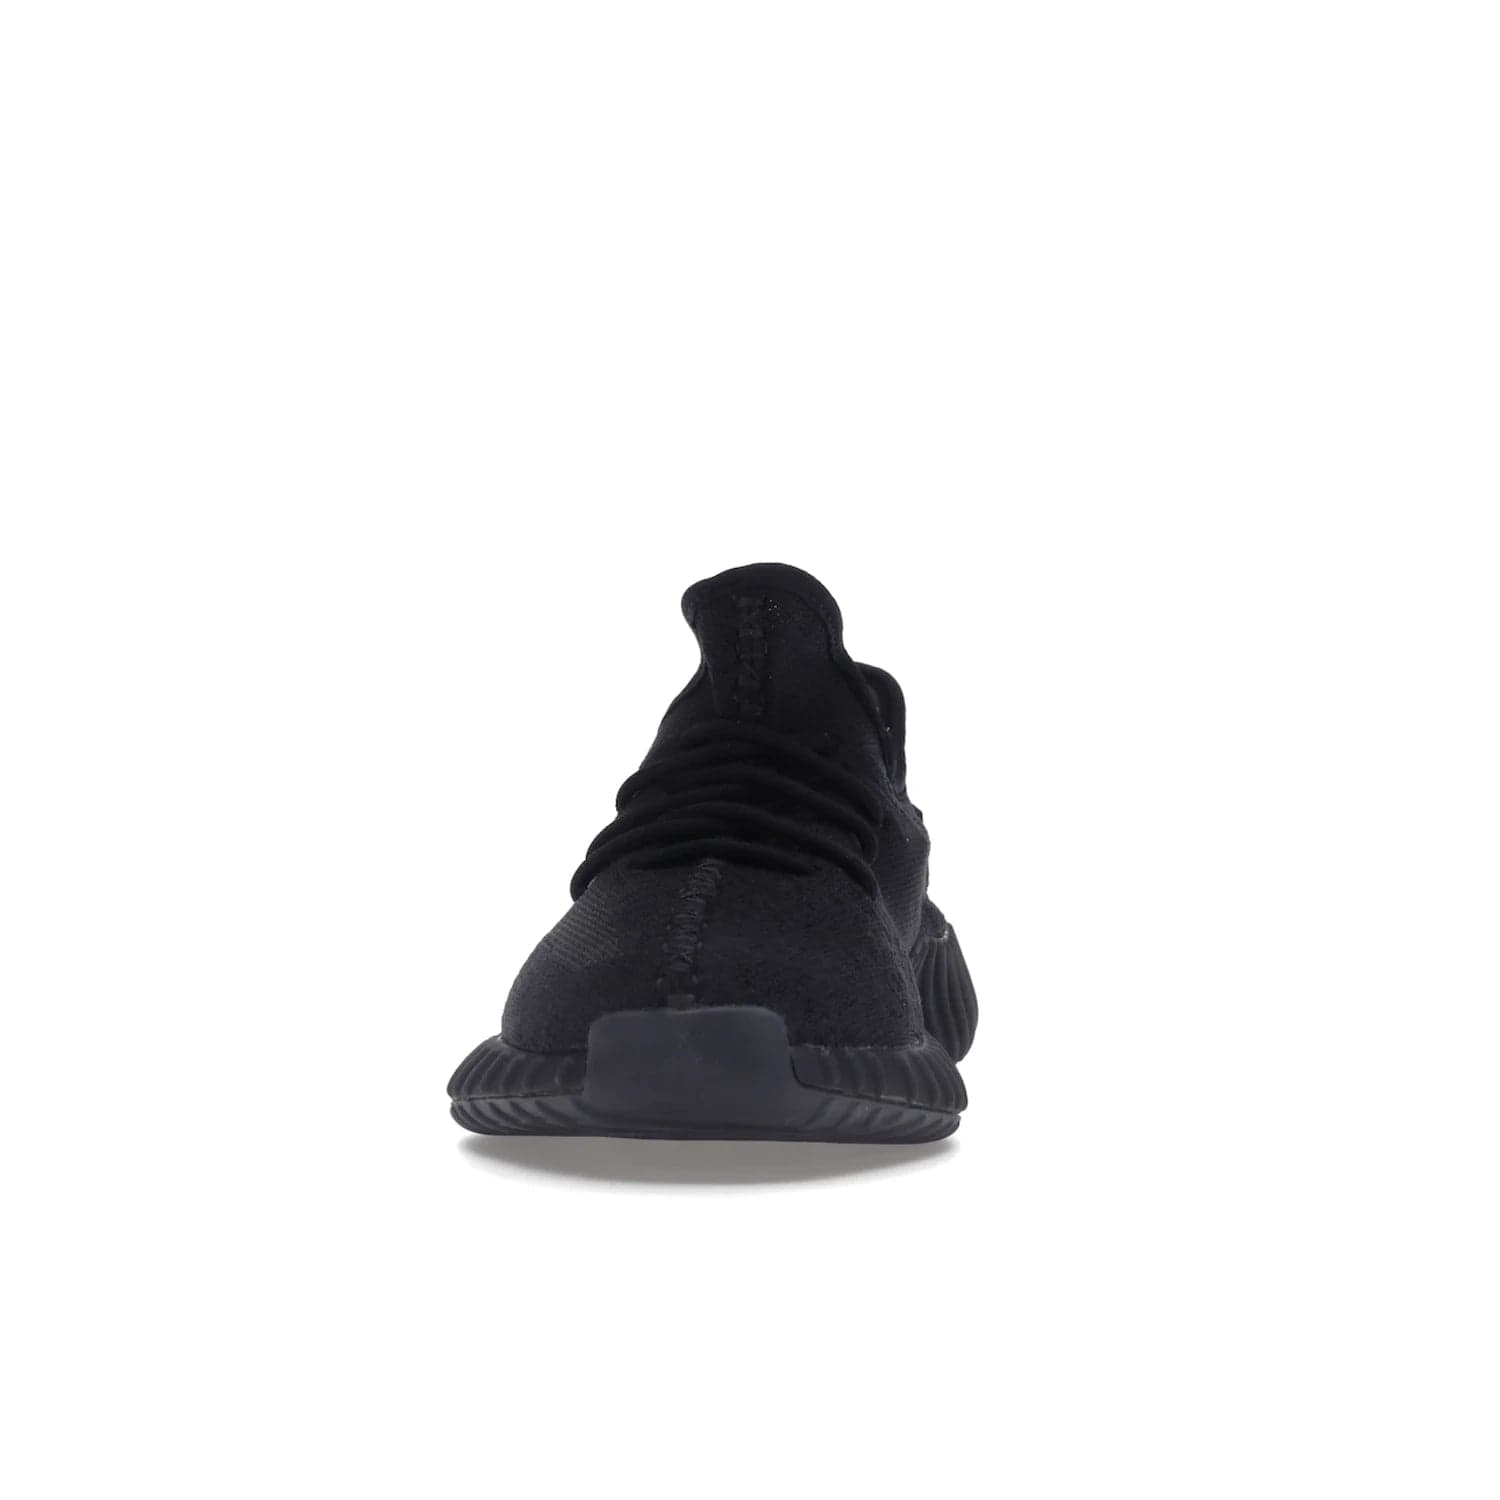 adidas Yeezy Boost 350 V2 Onyx - Image 11 - Only at www.BallersClubKickz.com - Adidas Yeezy Boost 350 V2 Onyx Triple Black shoes for comfort and style. Arriving Spring 2022.